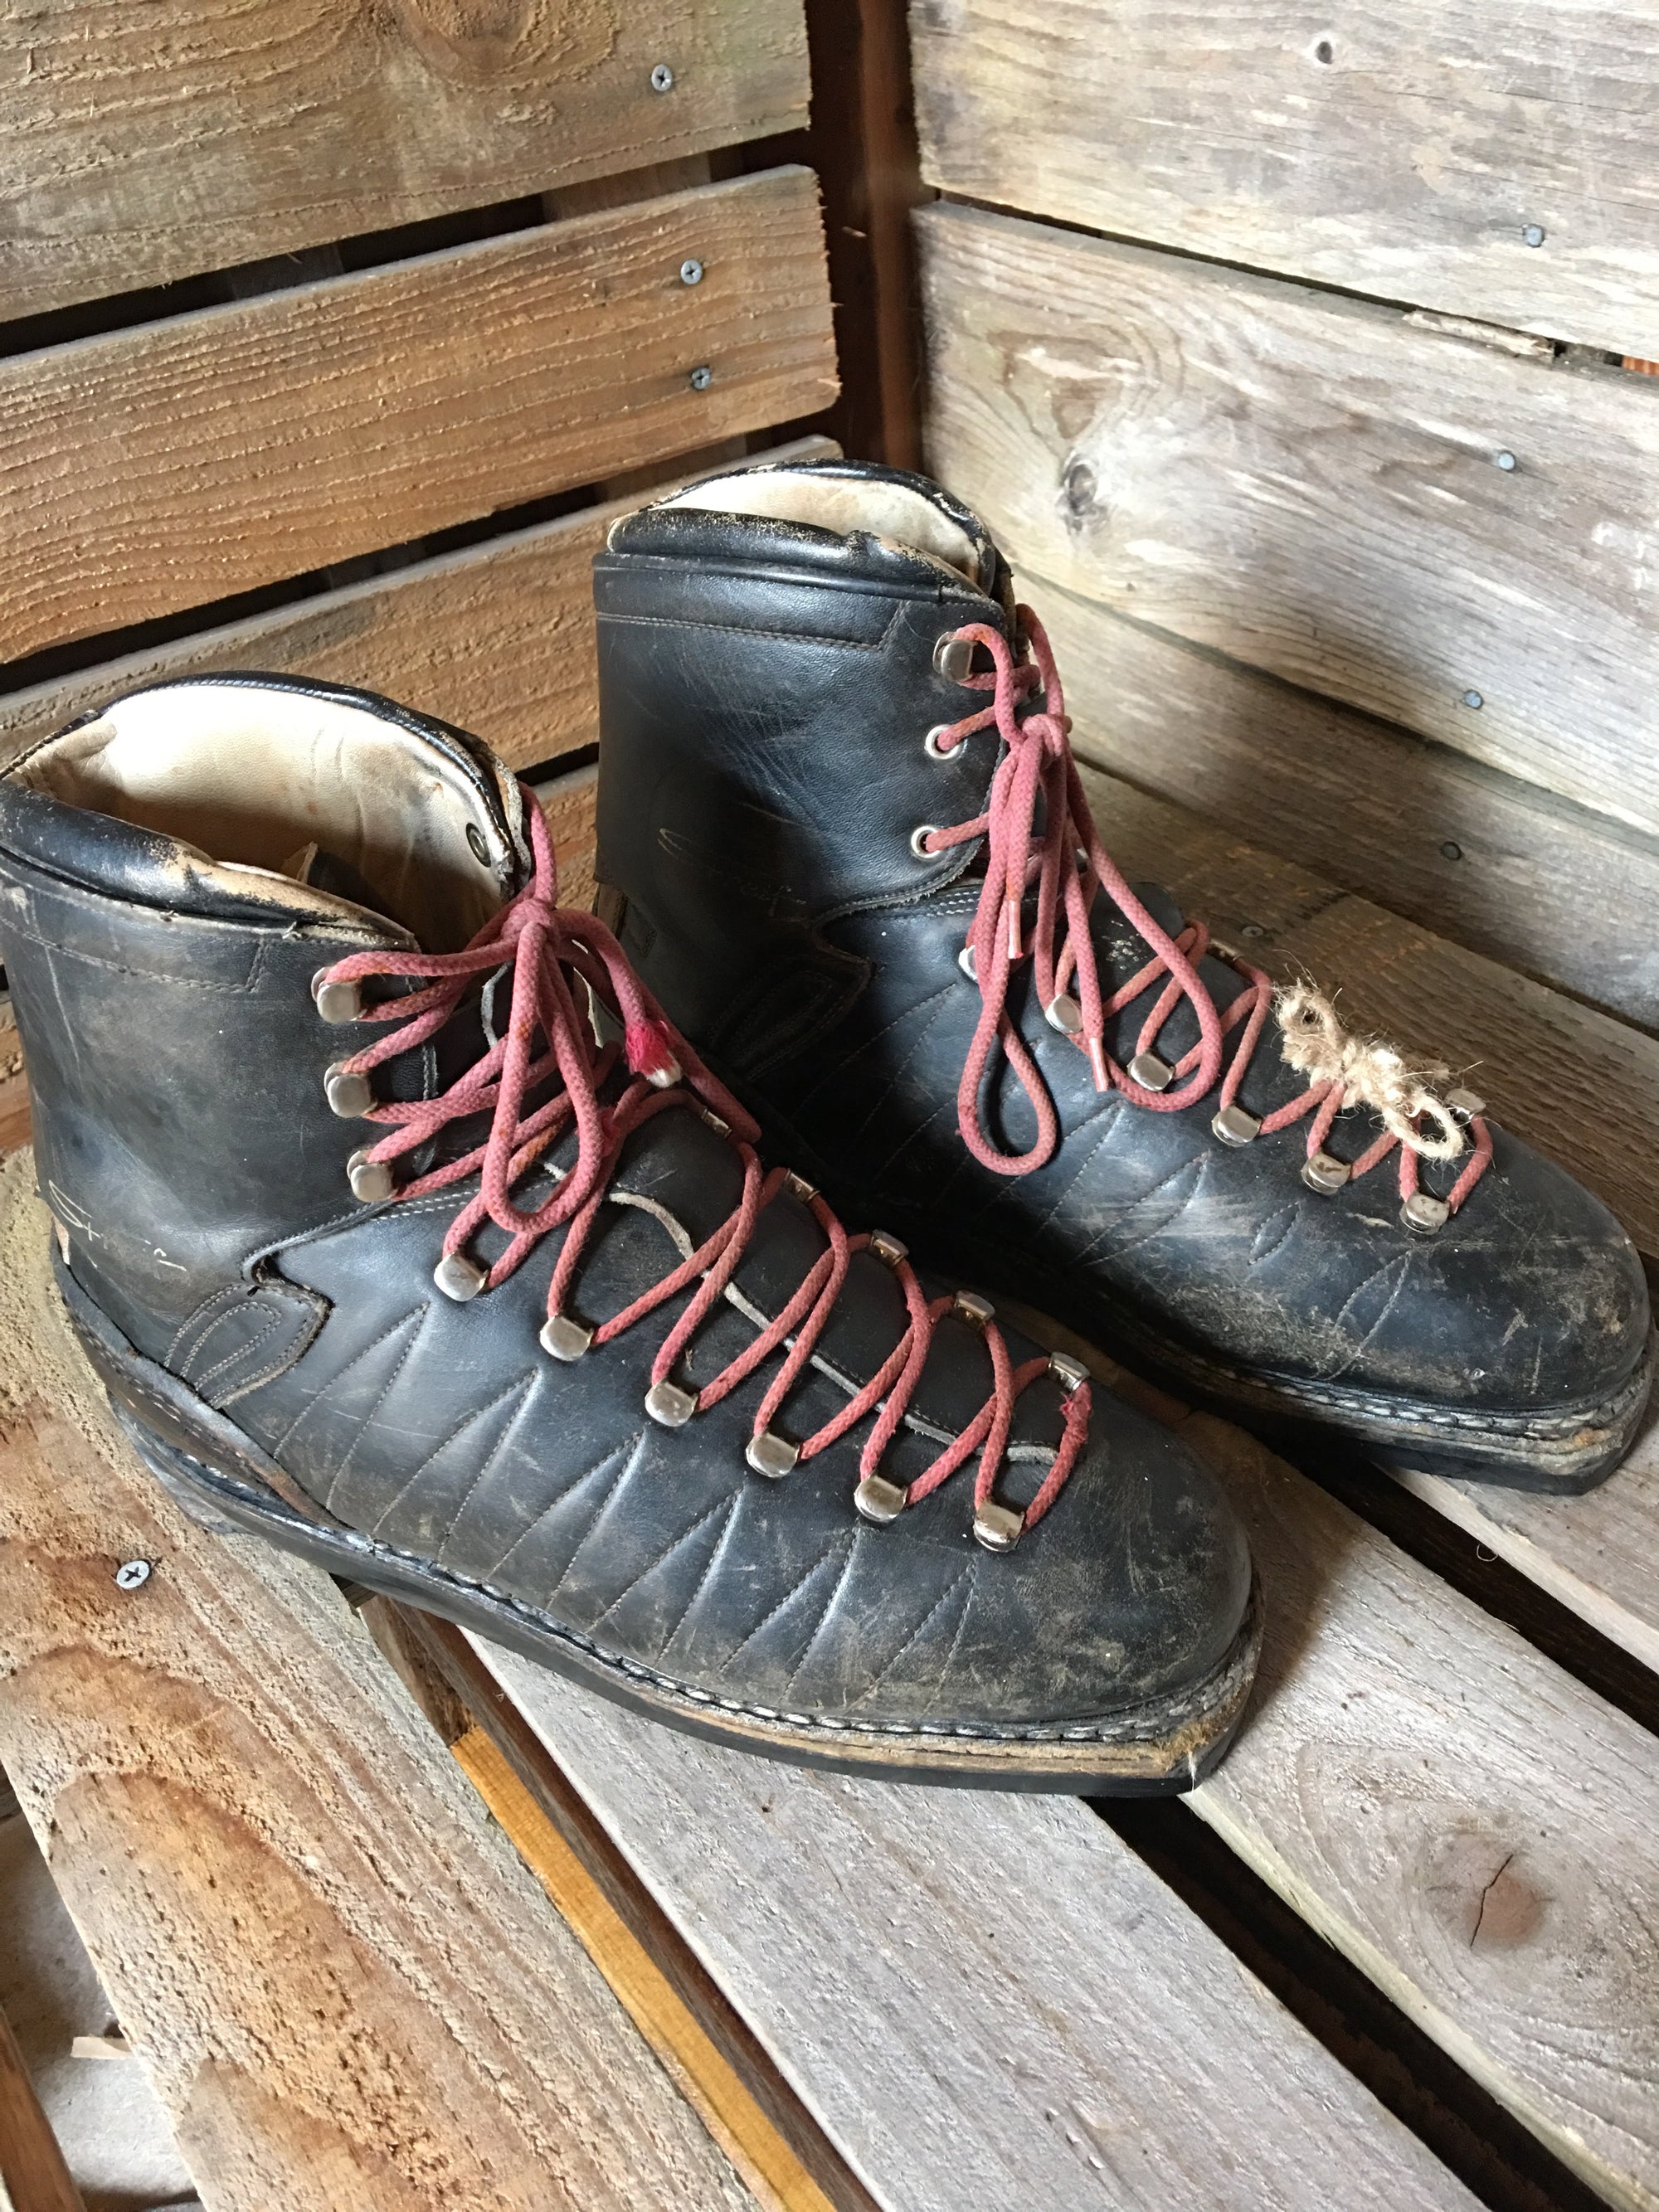 Vintage Black Leather Ski Boots with Red Laces - VintageWinter